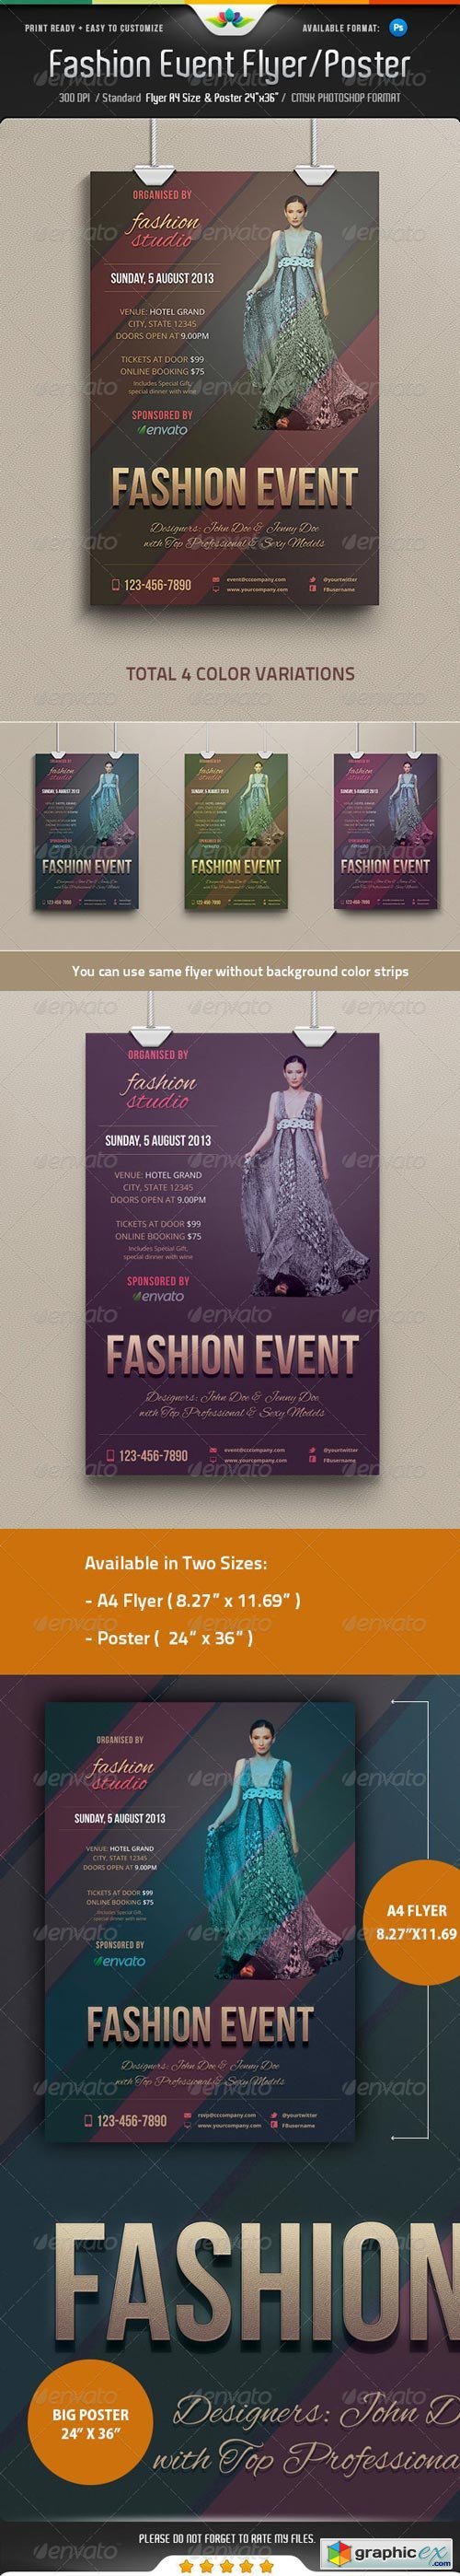 Fashion Event Flyer / Poster